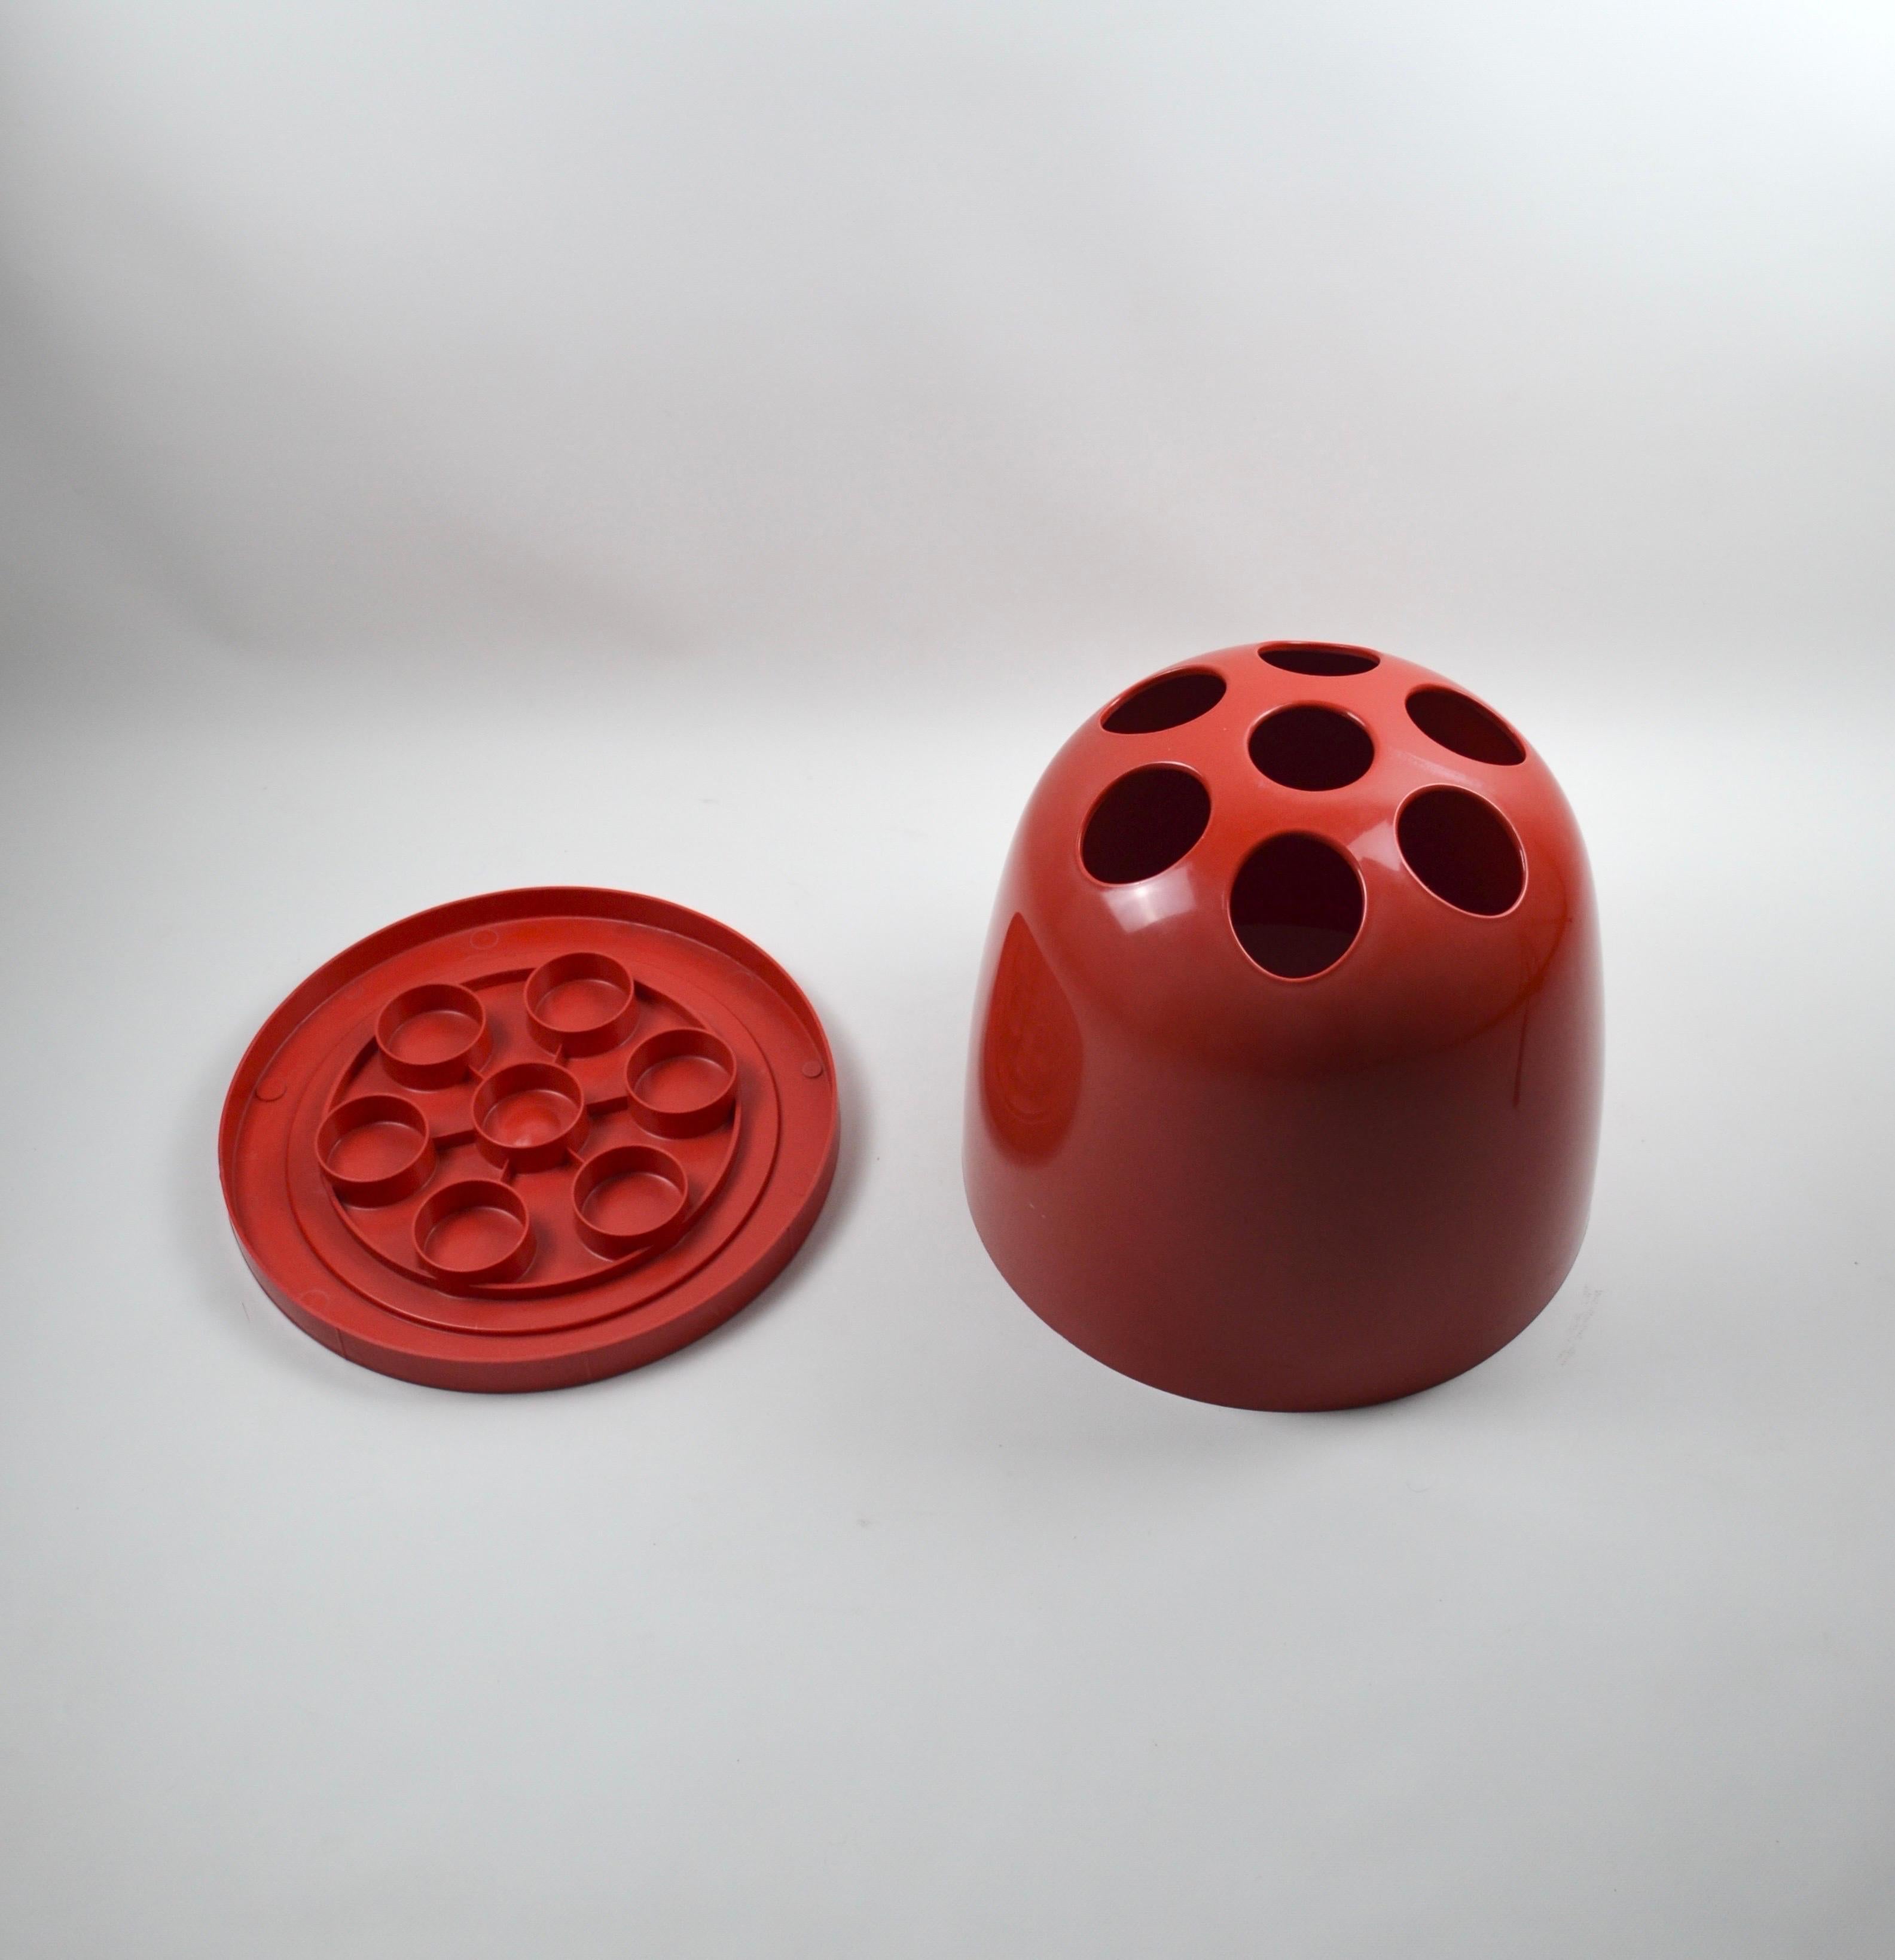 This umbrella stand, model Dedalo, was designed by Emma Gismondi Schweinberger and manufactured by Artemide in 1966. It is made of ABS plastic in the color red.